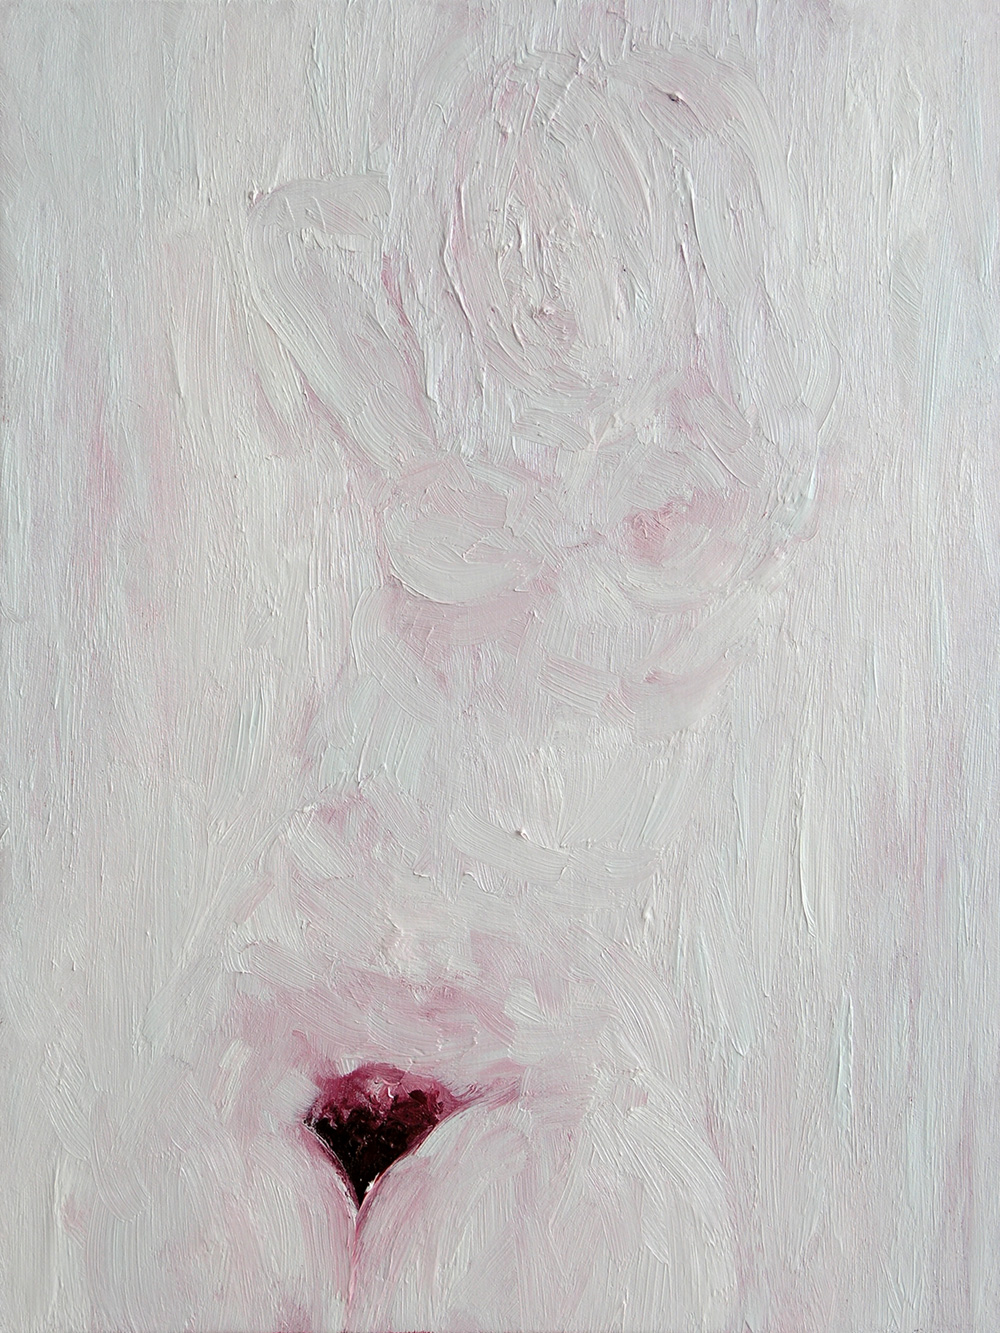 Nude 4, a painting by Guido Vrolix